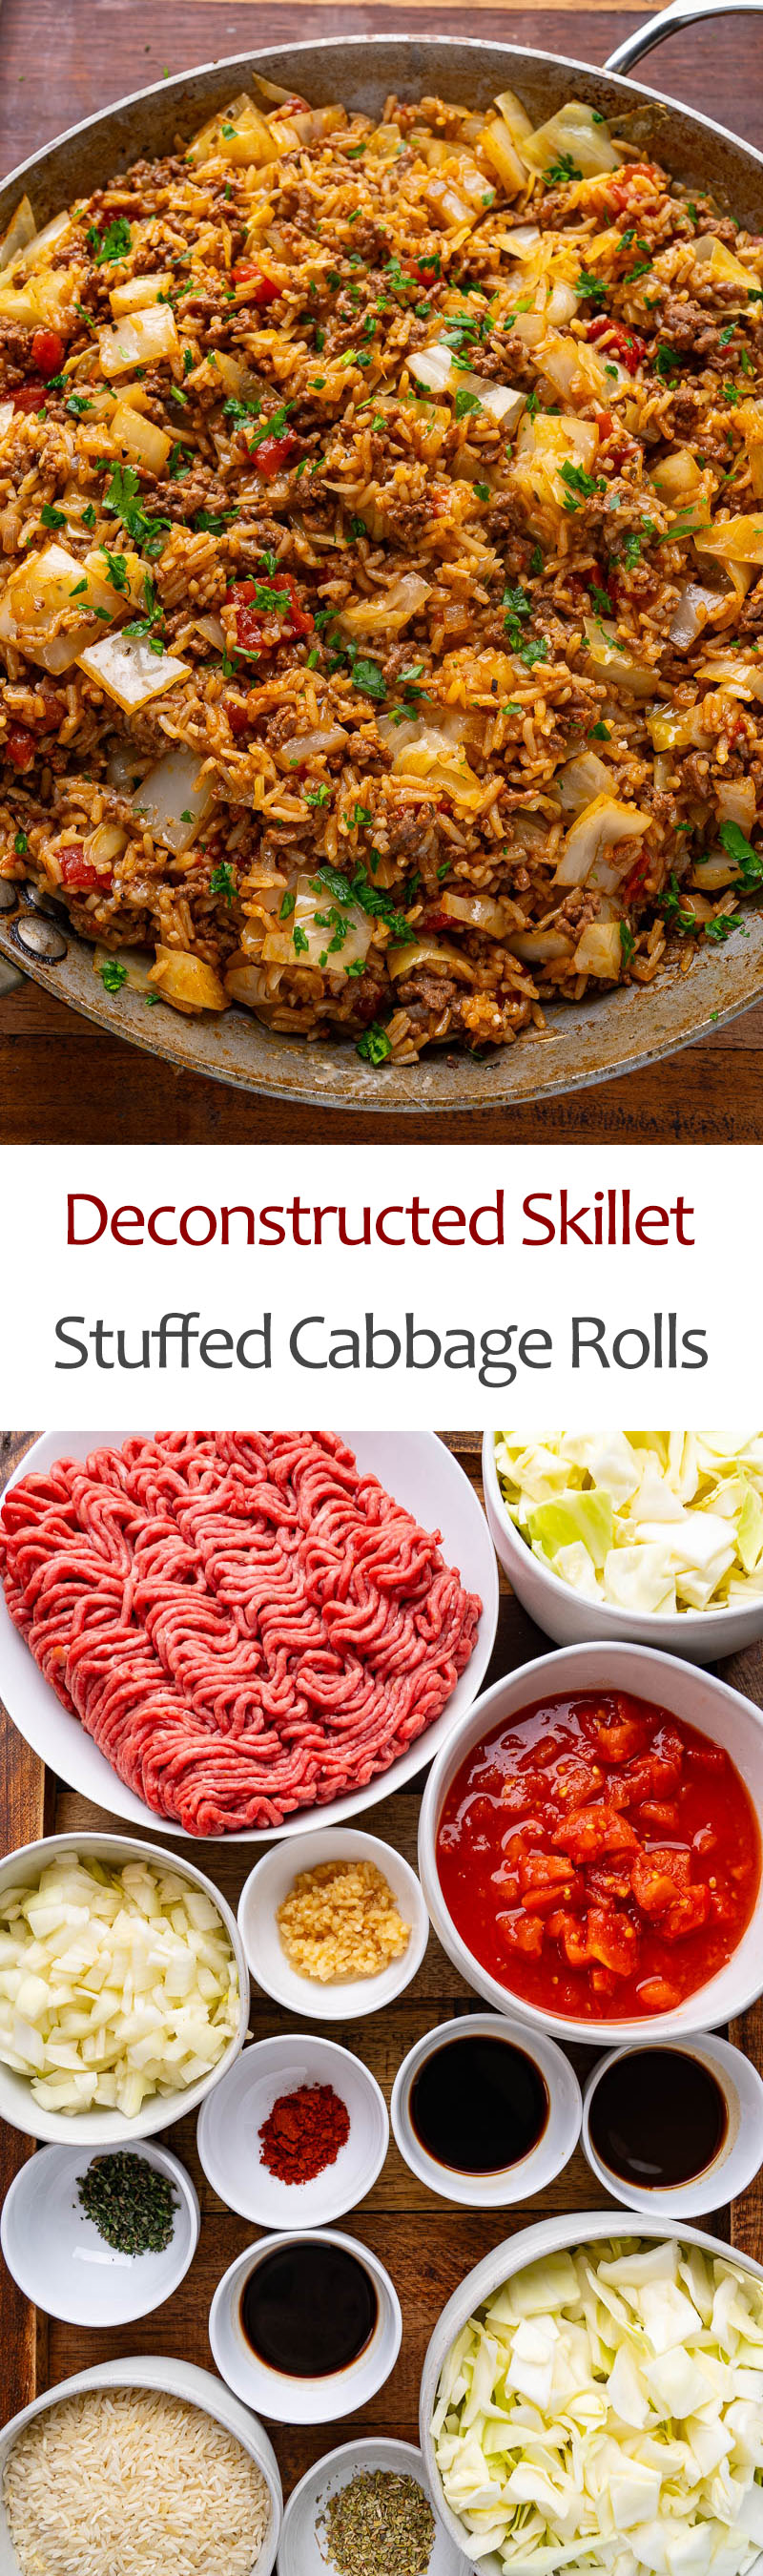 Deconstructed Skillet Stuffed Cabbage Rolls